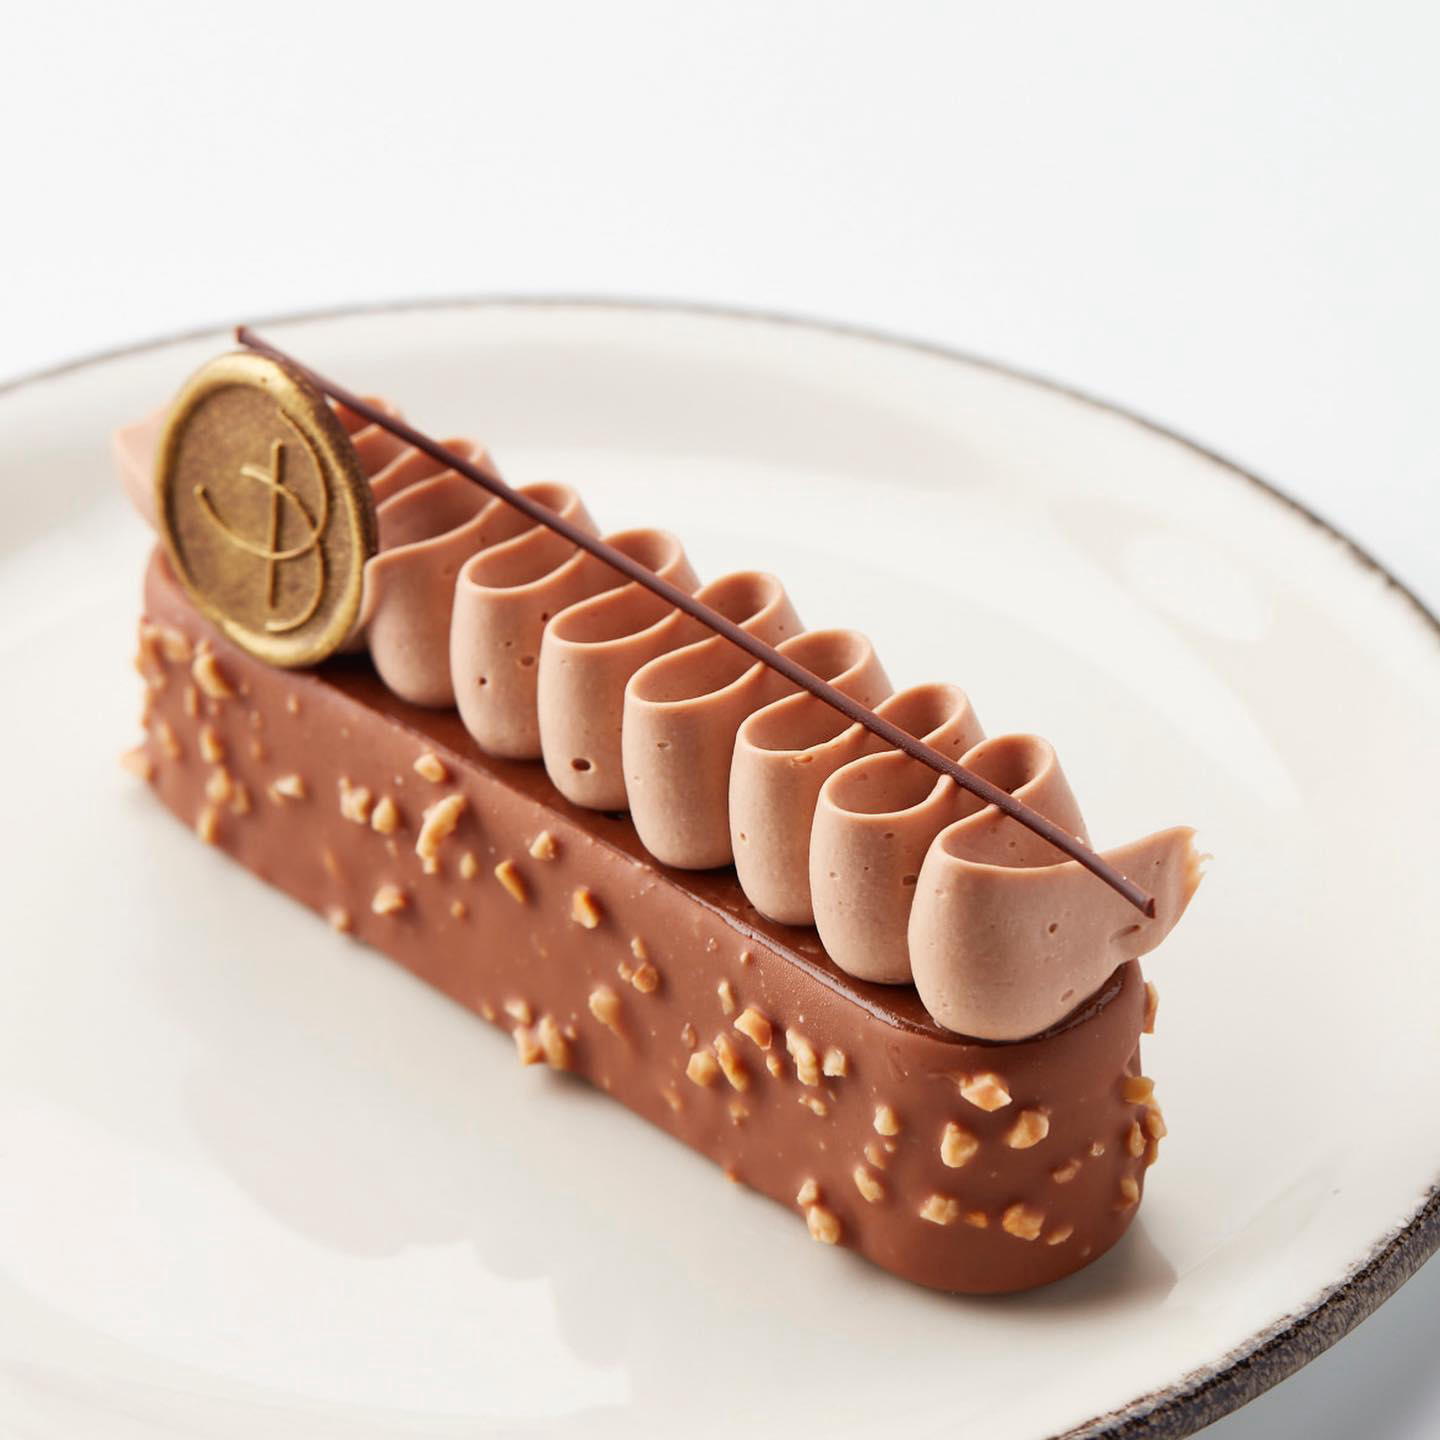 Bachour’s “Rocher” Bar recipe in my new book Bachour Buffets by #booksforchefsofficial